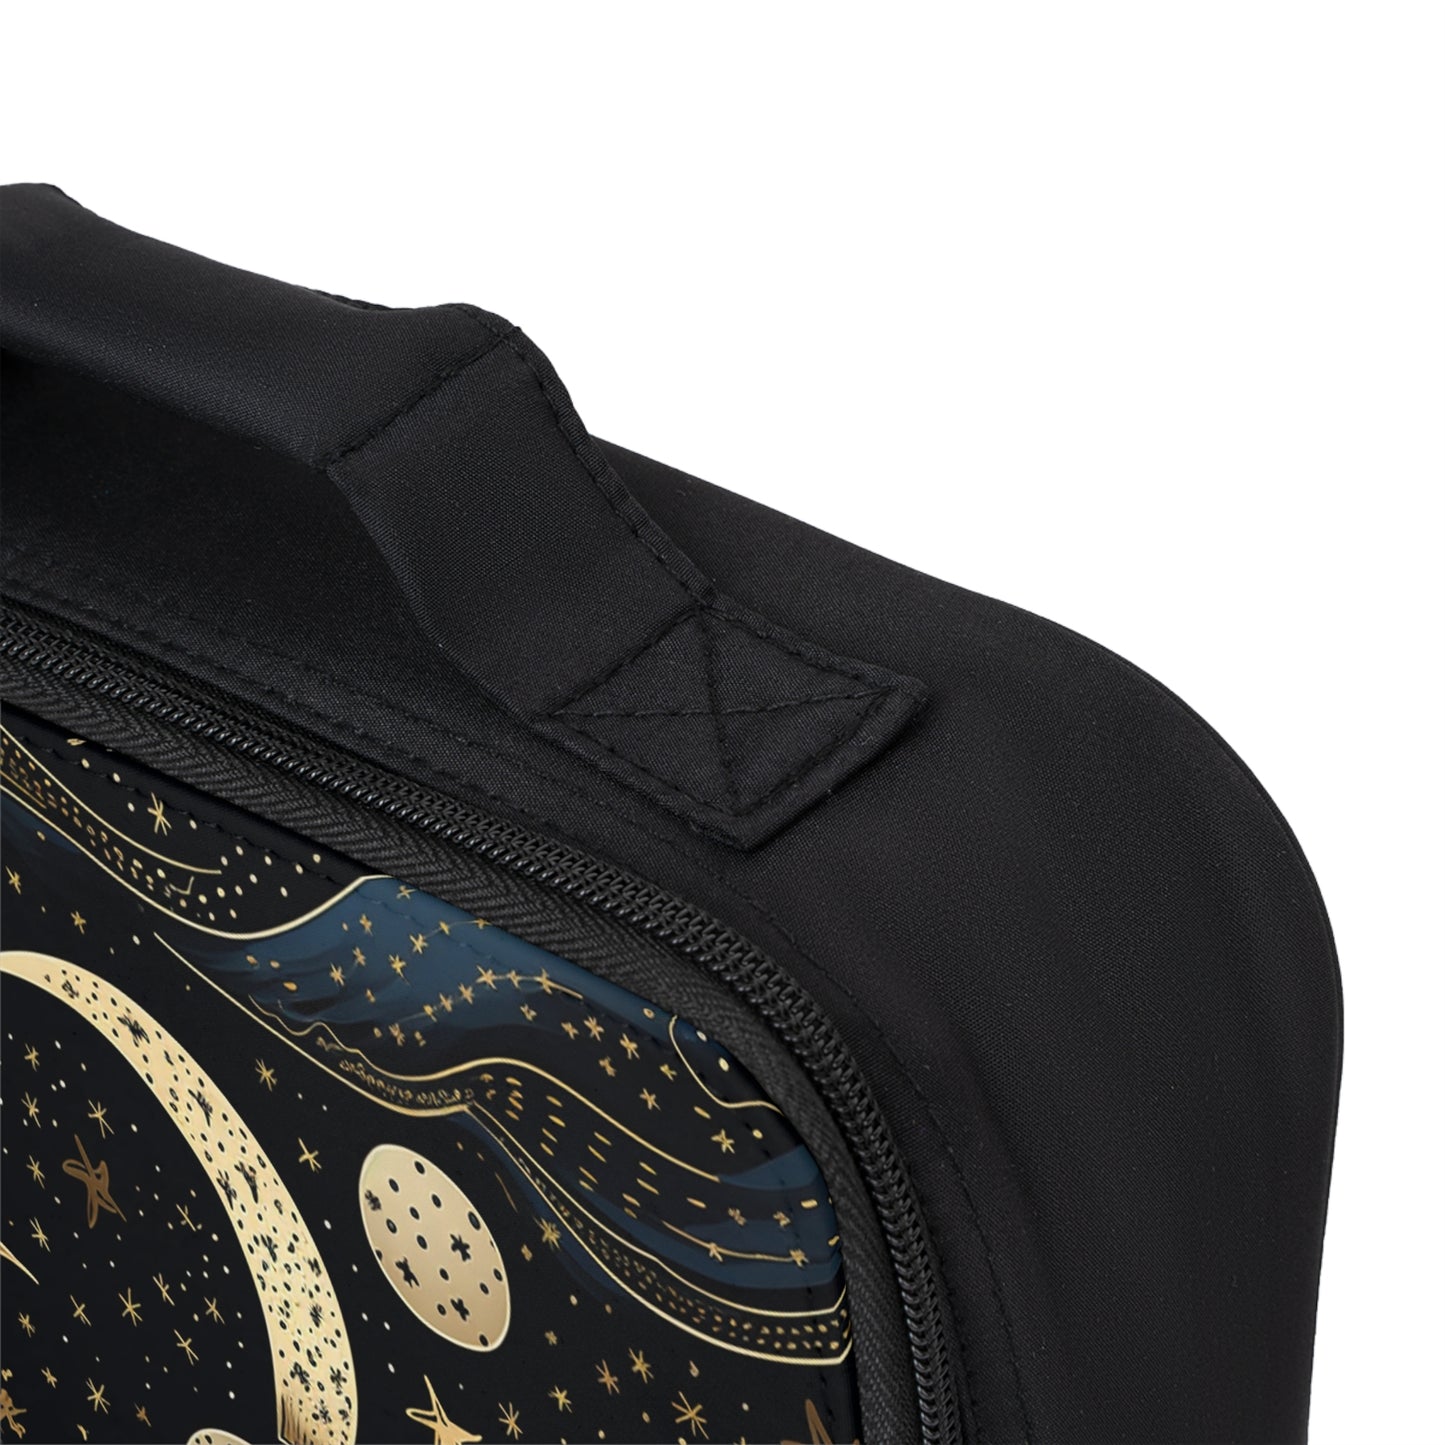 Celestial Moon Abstract Zipper Lunch Bag | Cosmic Themed, Starry Accessories